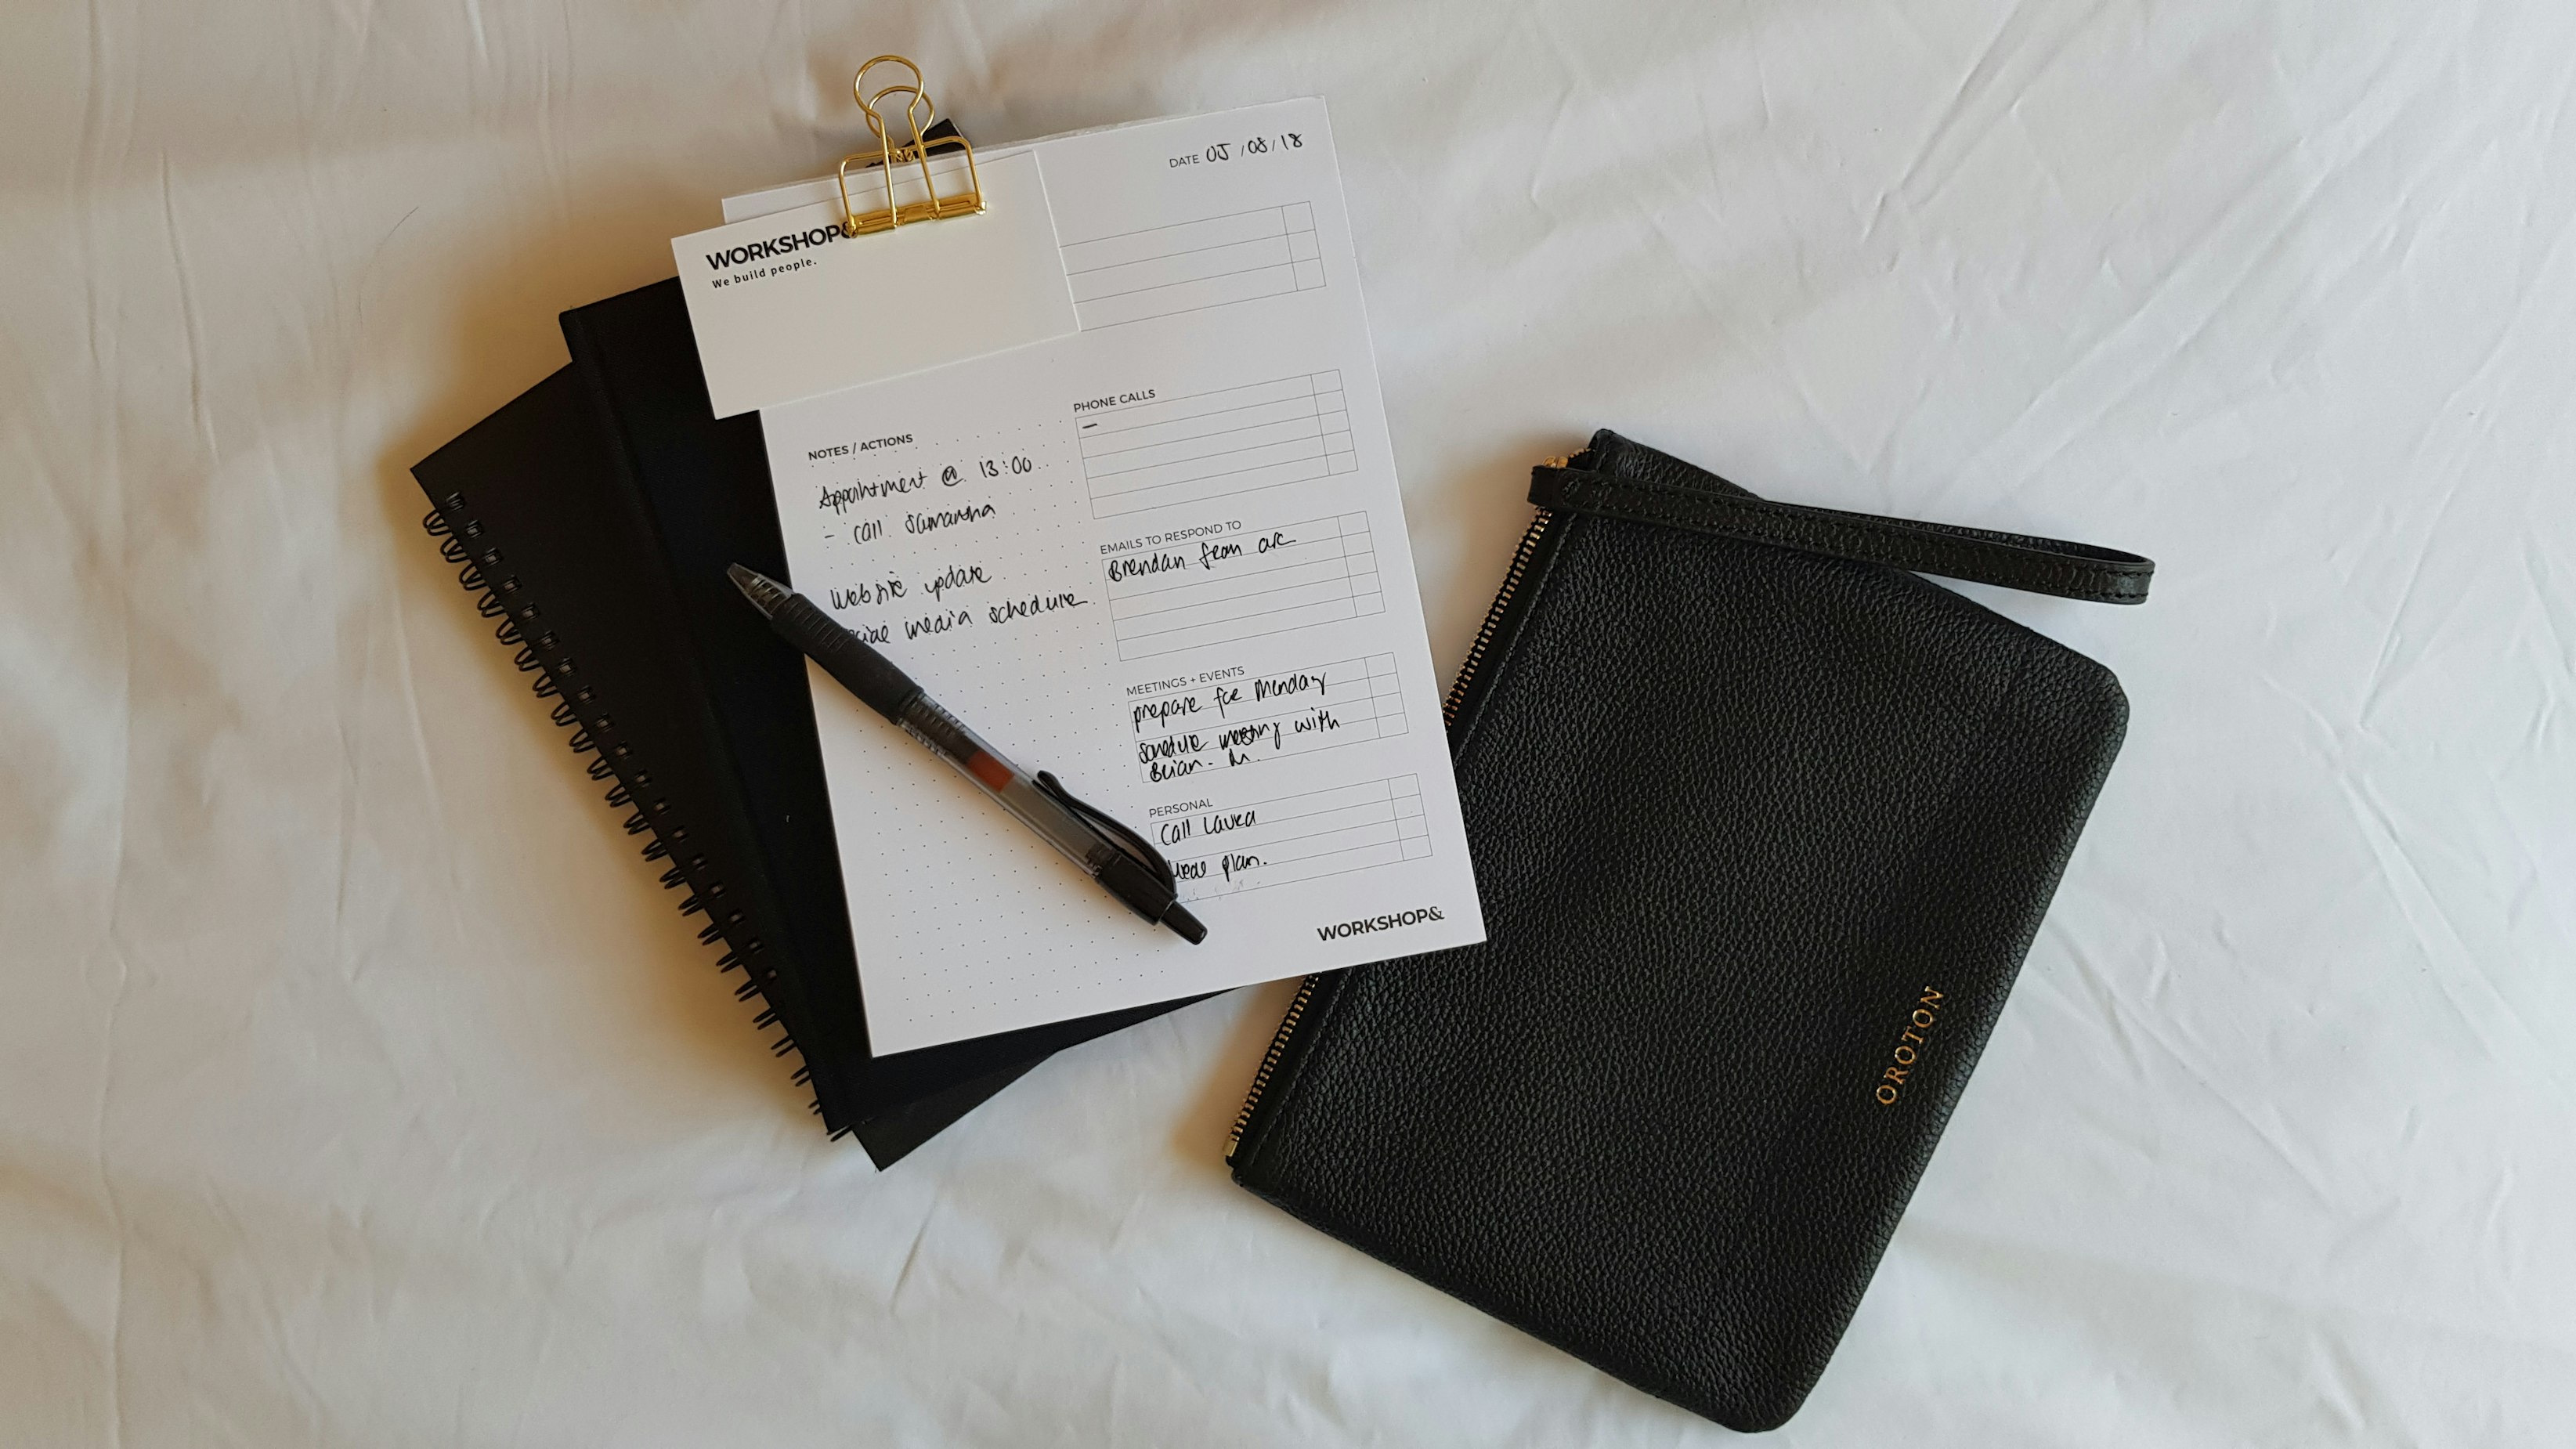 A note book with writing on it, on a white bed, with a small black purse next to it.